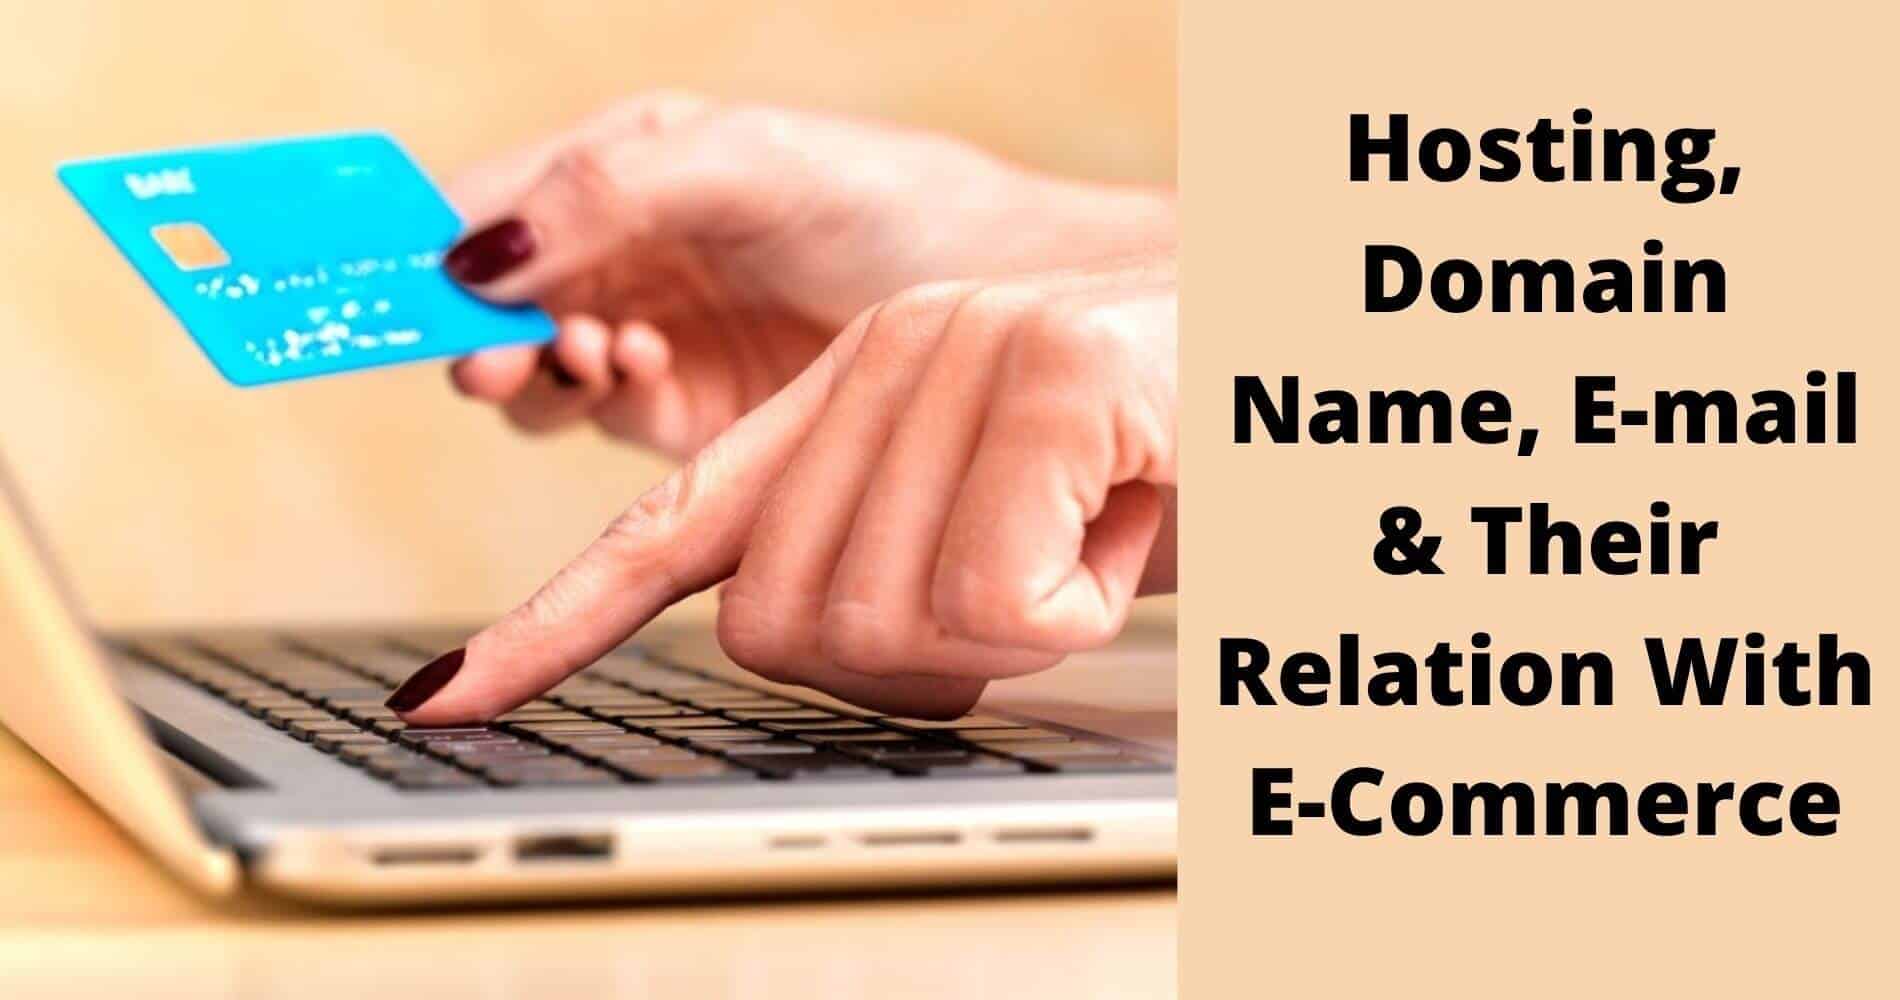 Hosting, Domain Name, E-mail & Their Relation With E-Commerce